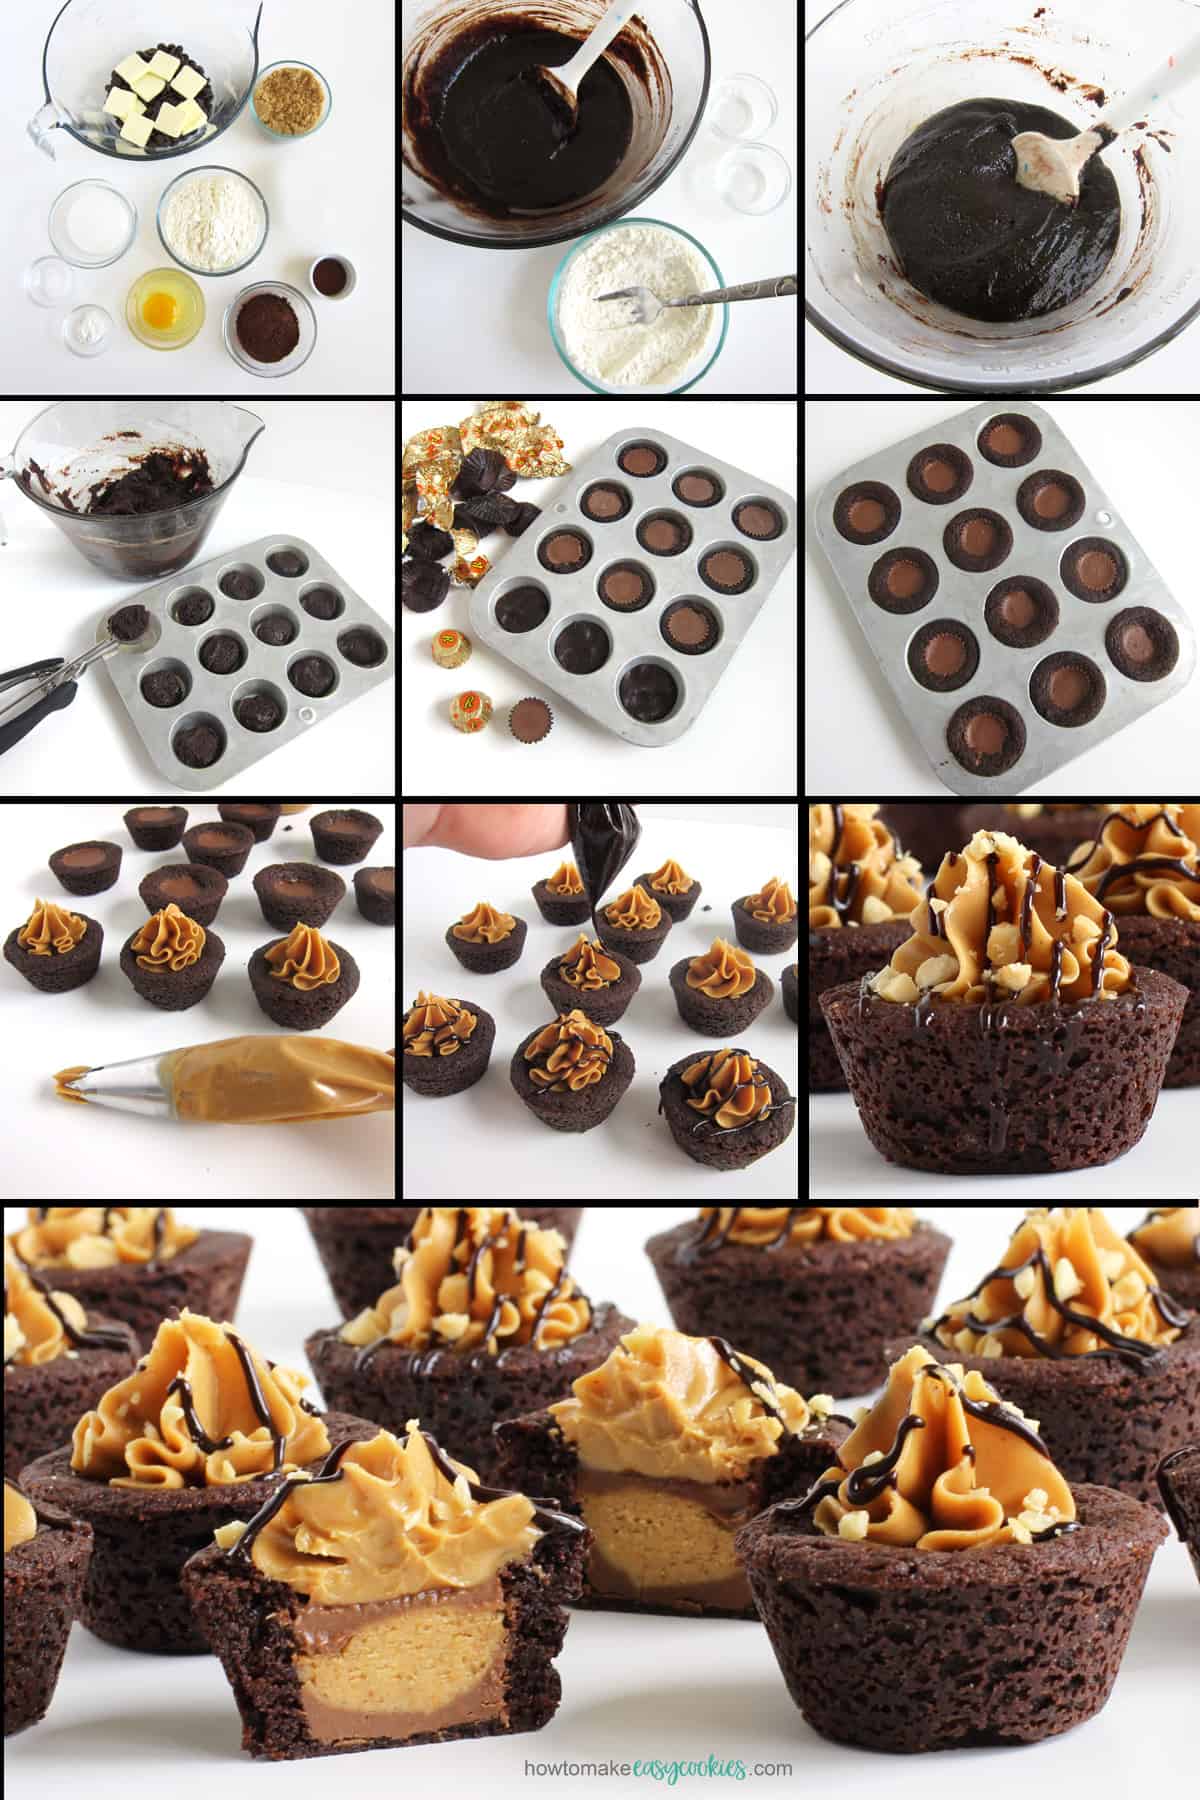 fill mini muffin cups with scoops of chocolate cookie dough, insert miniature Reese's Cups, bake, top with peanut butter, chocolate, and peanuts